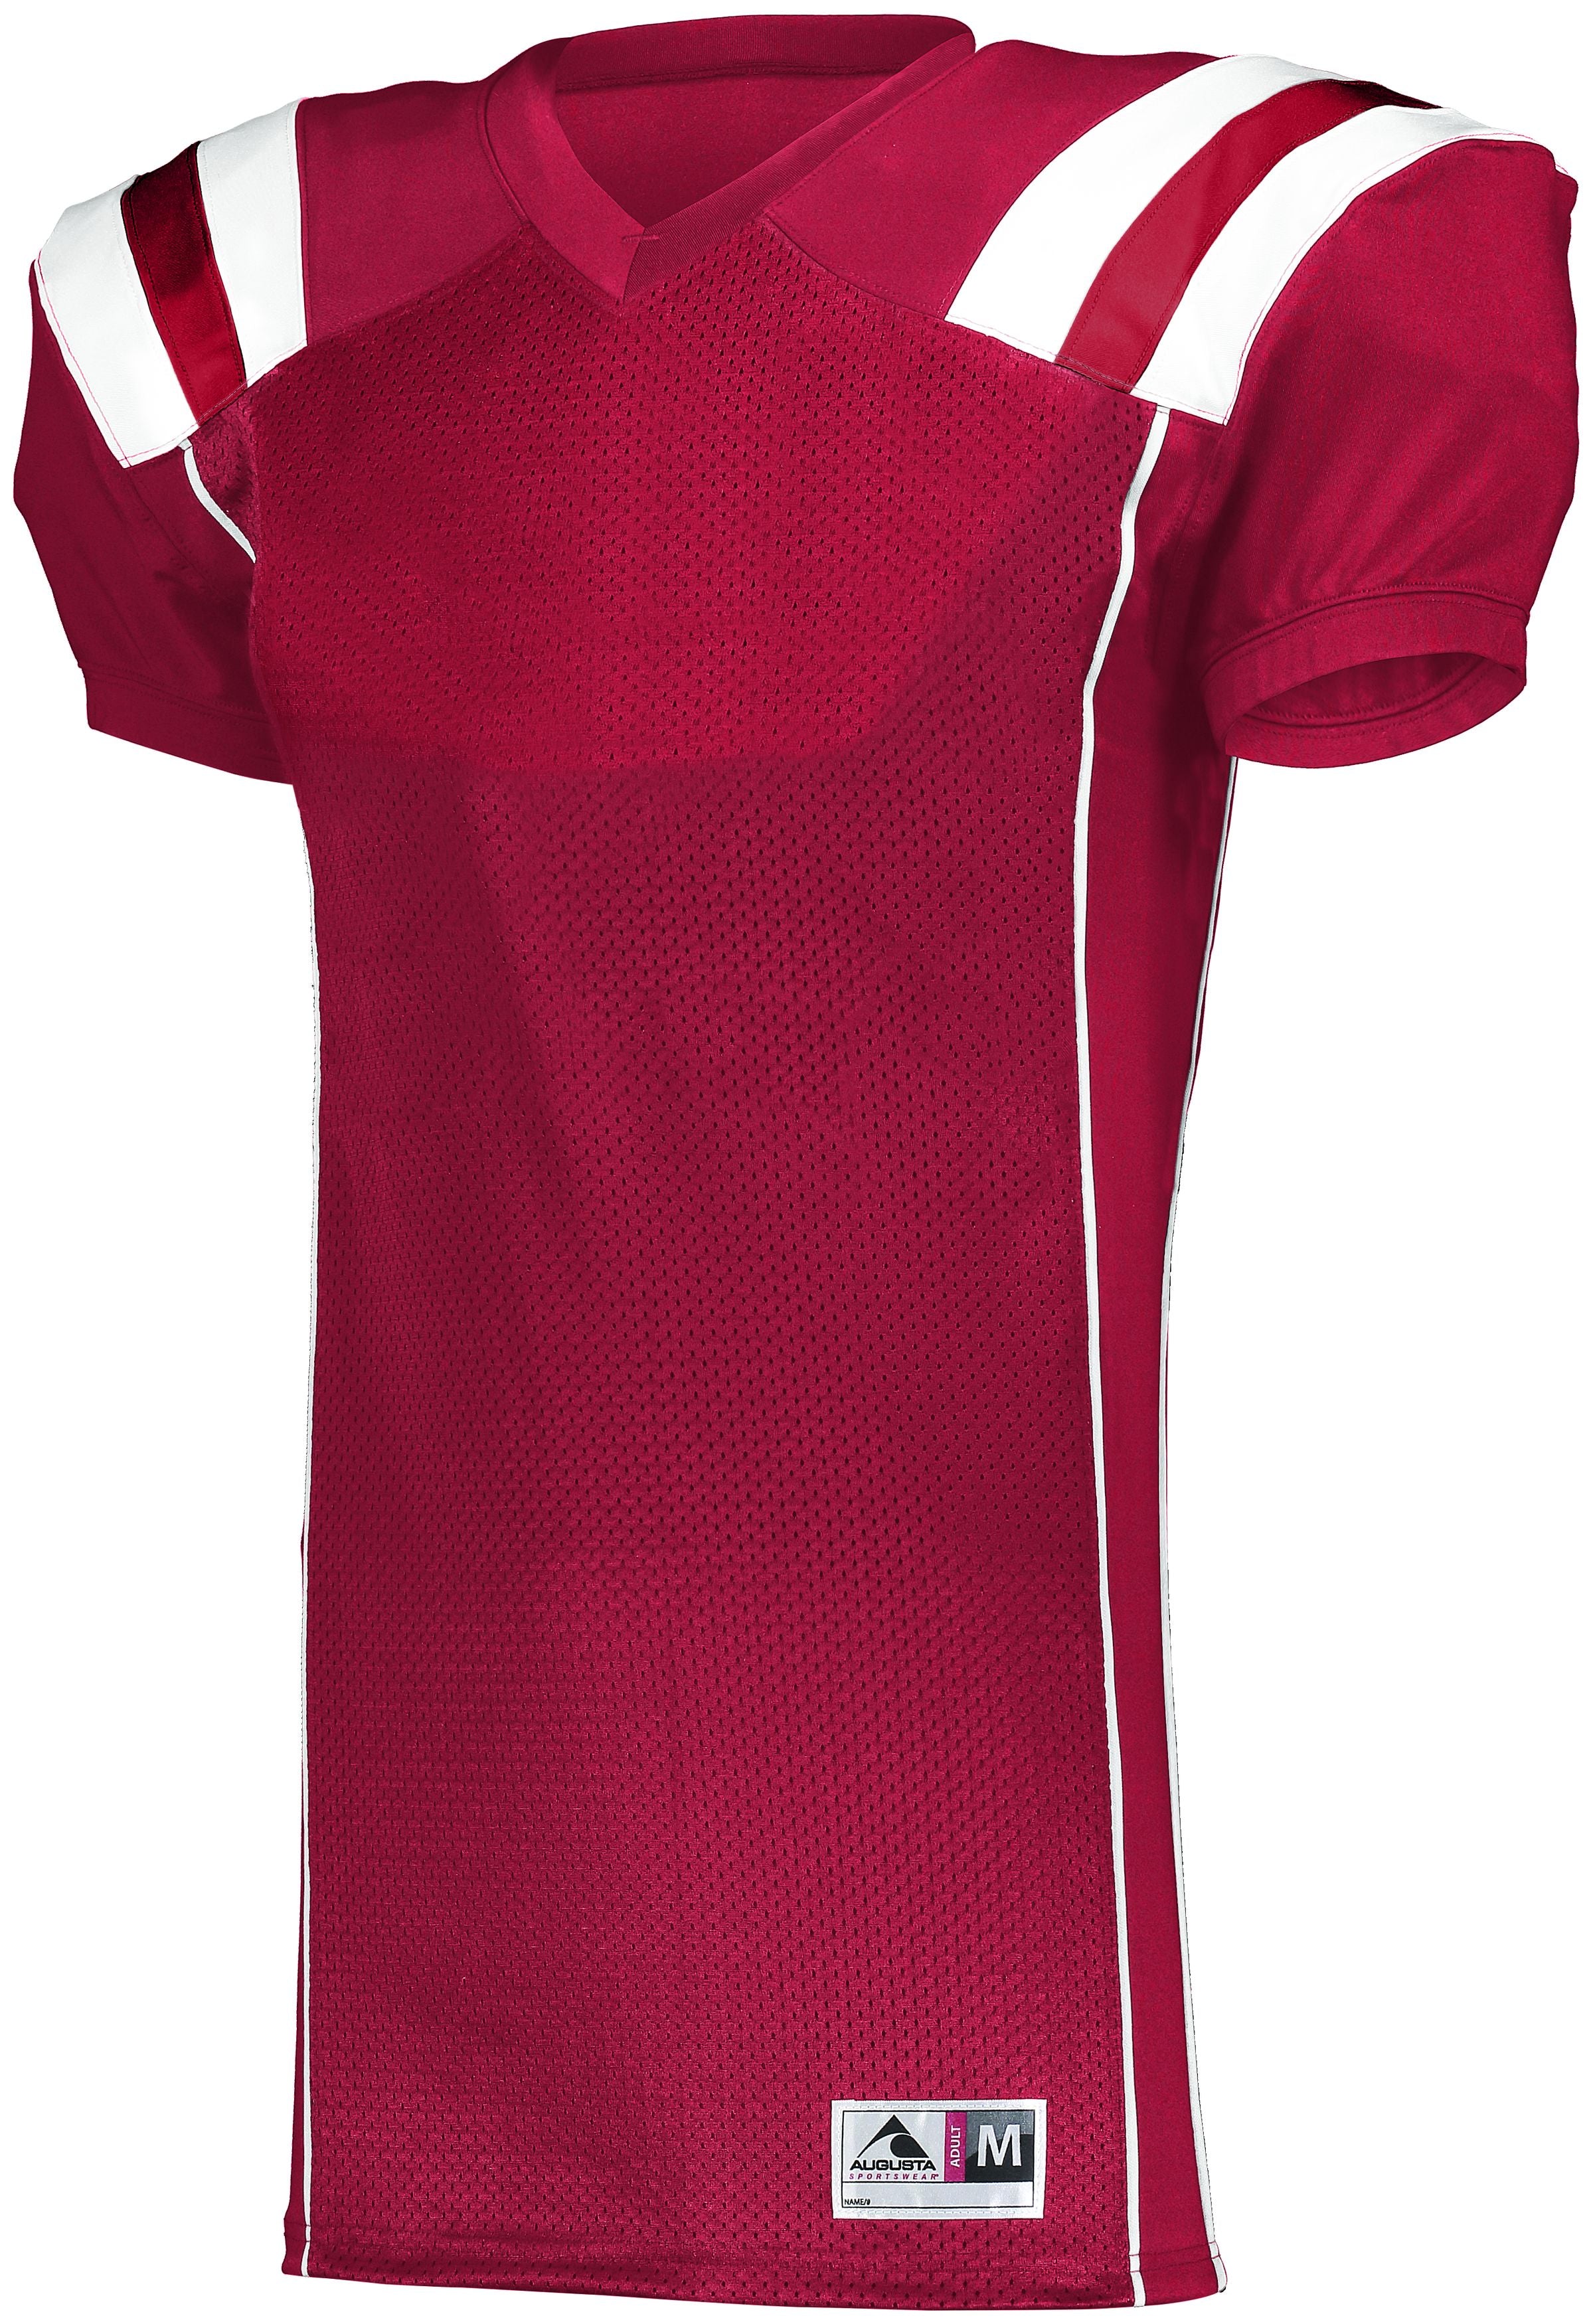 Augusta Sportswear Youth Tform Football Jersey in Red/White  -Part of the Youth, Youth-Jersey, Augusta-Products, Football, Shirts, All-Sports, All-Sports-1 product lines at KanaleyCreations.com